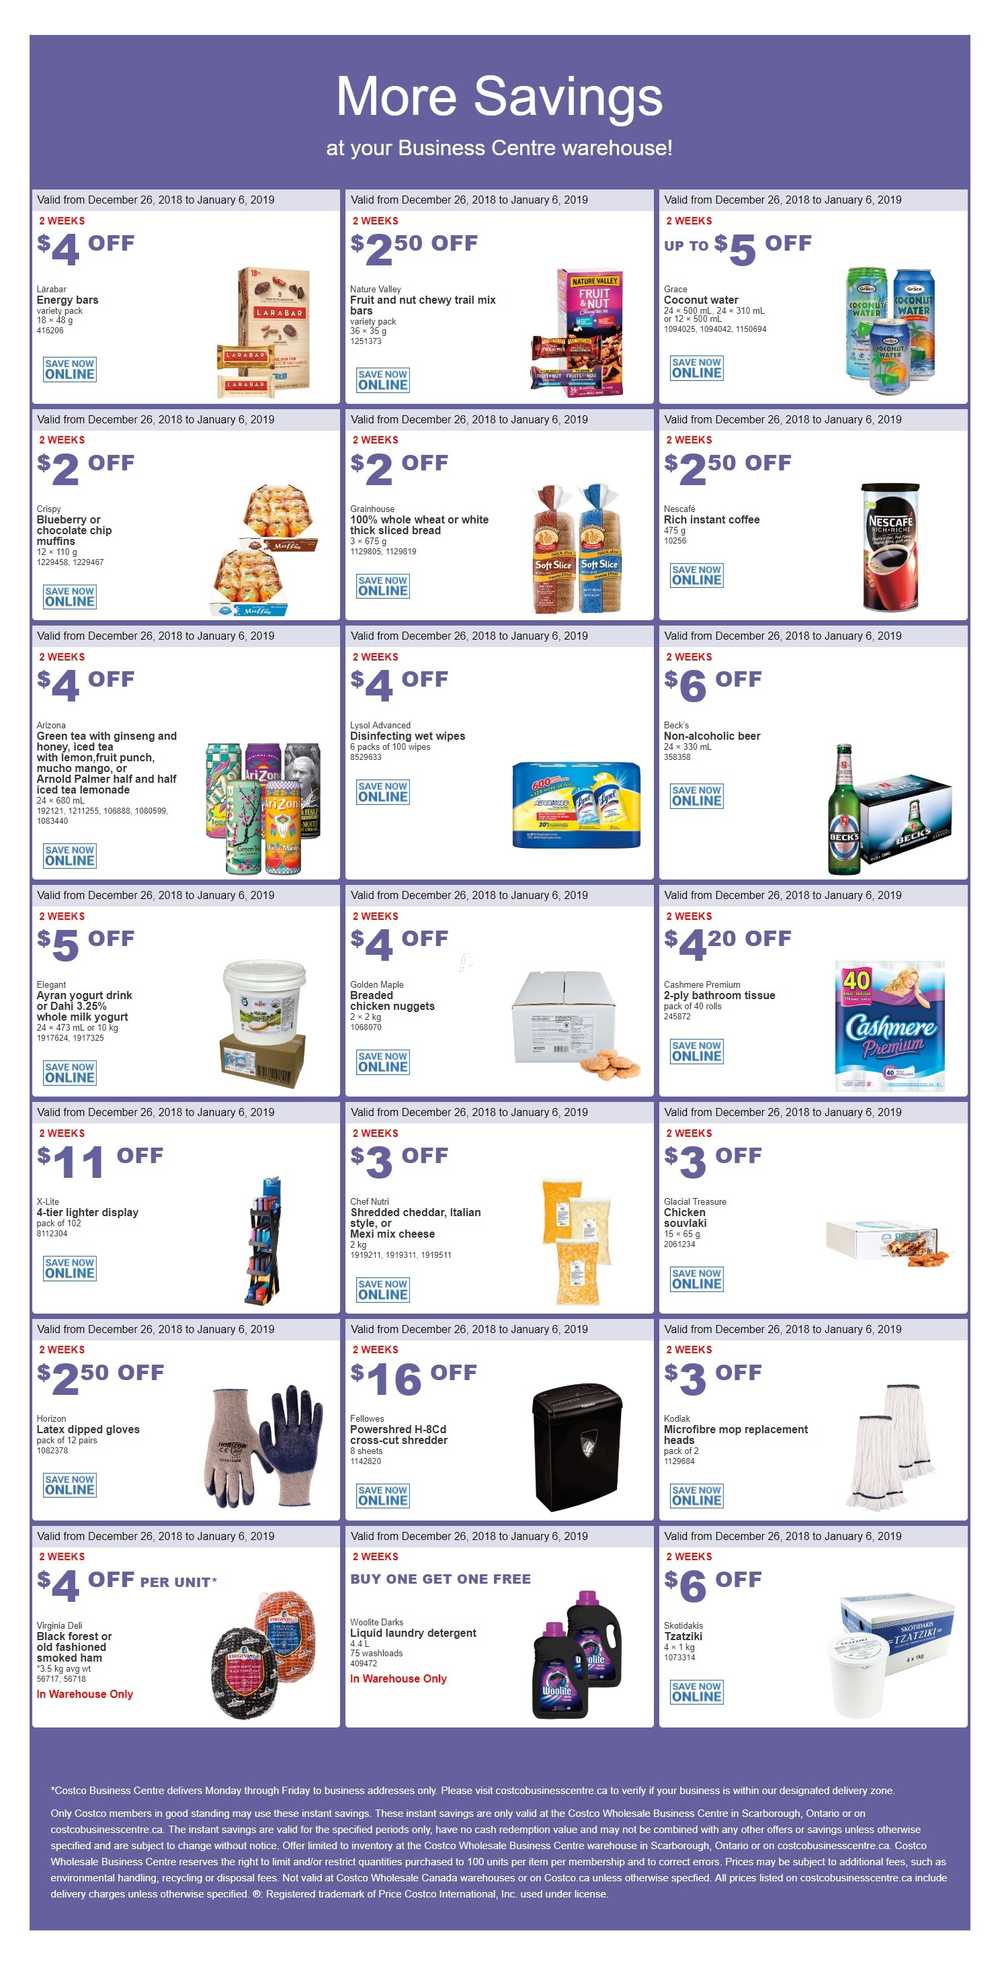 Costco Business Centre Scarborough On Instant Savings Flyer July 20